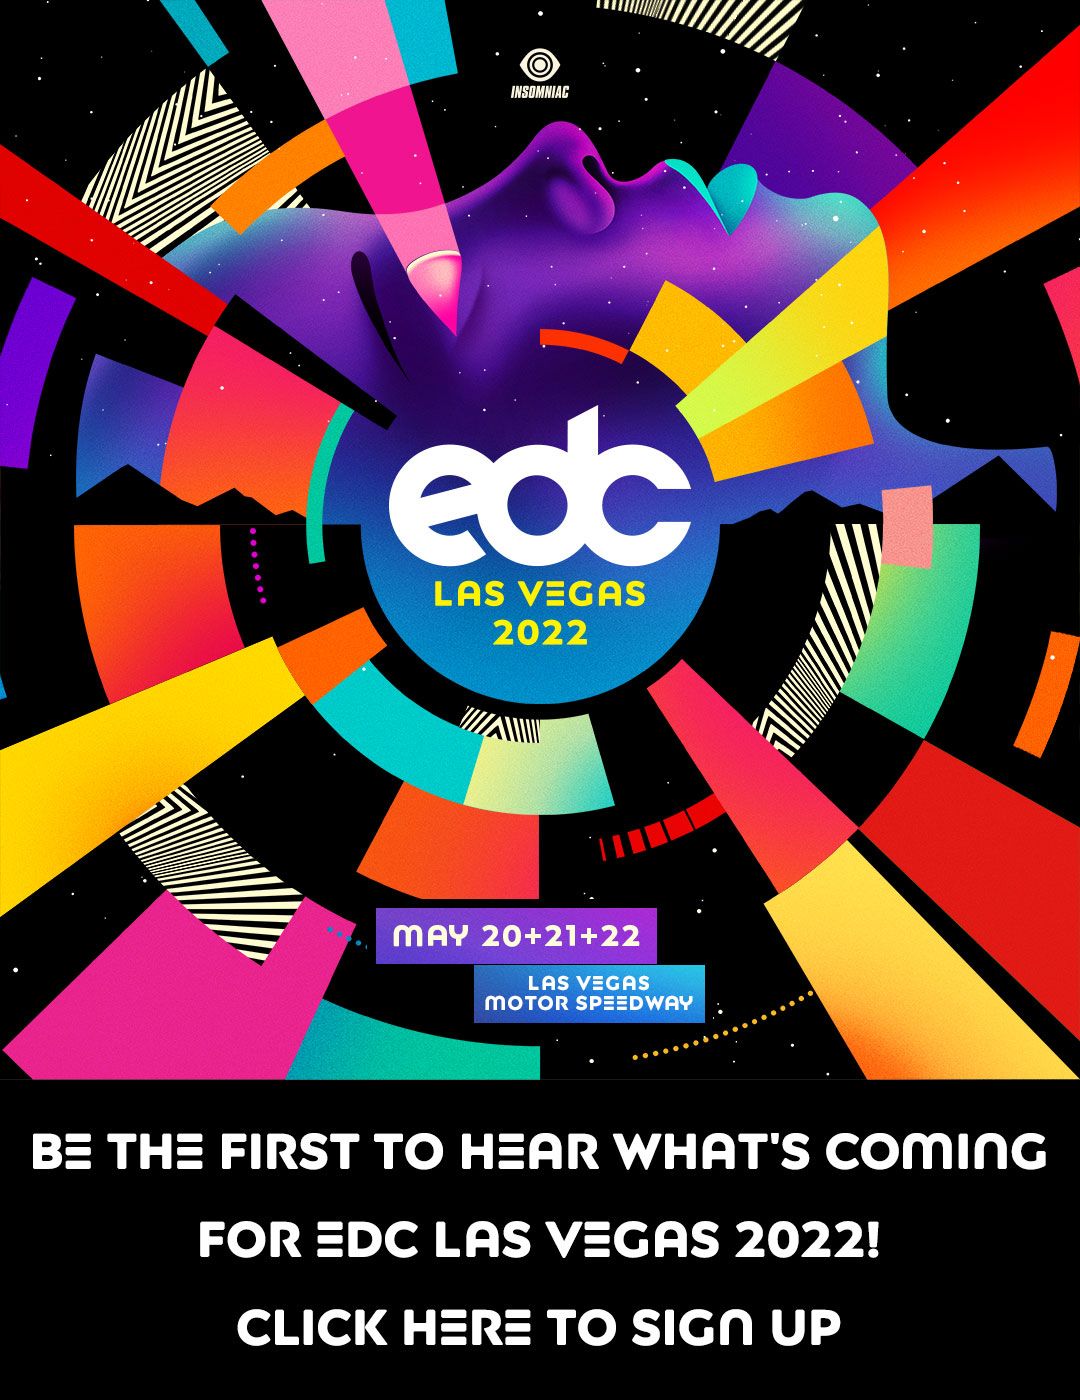 Electric Daisy Carnival EDC Las Vegas Shuttle Passes Only - 3 Day Pass (Concert)